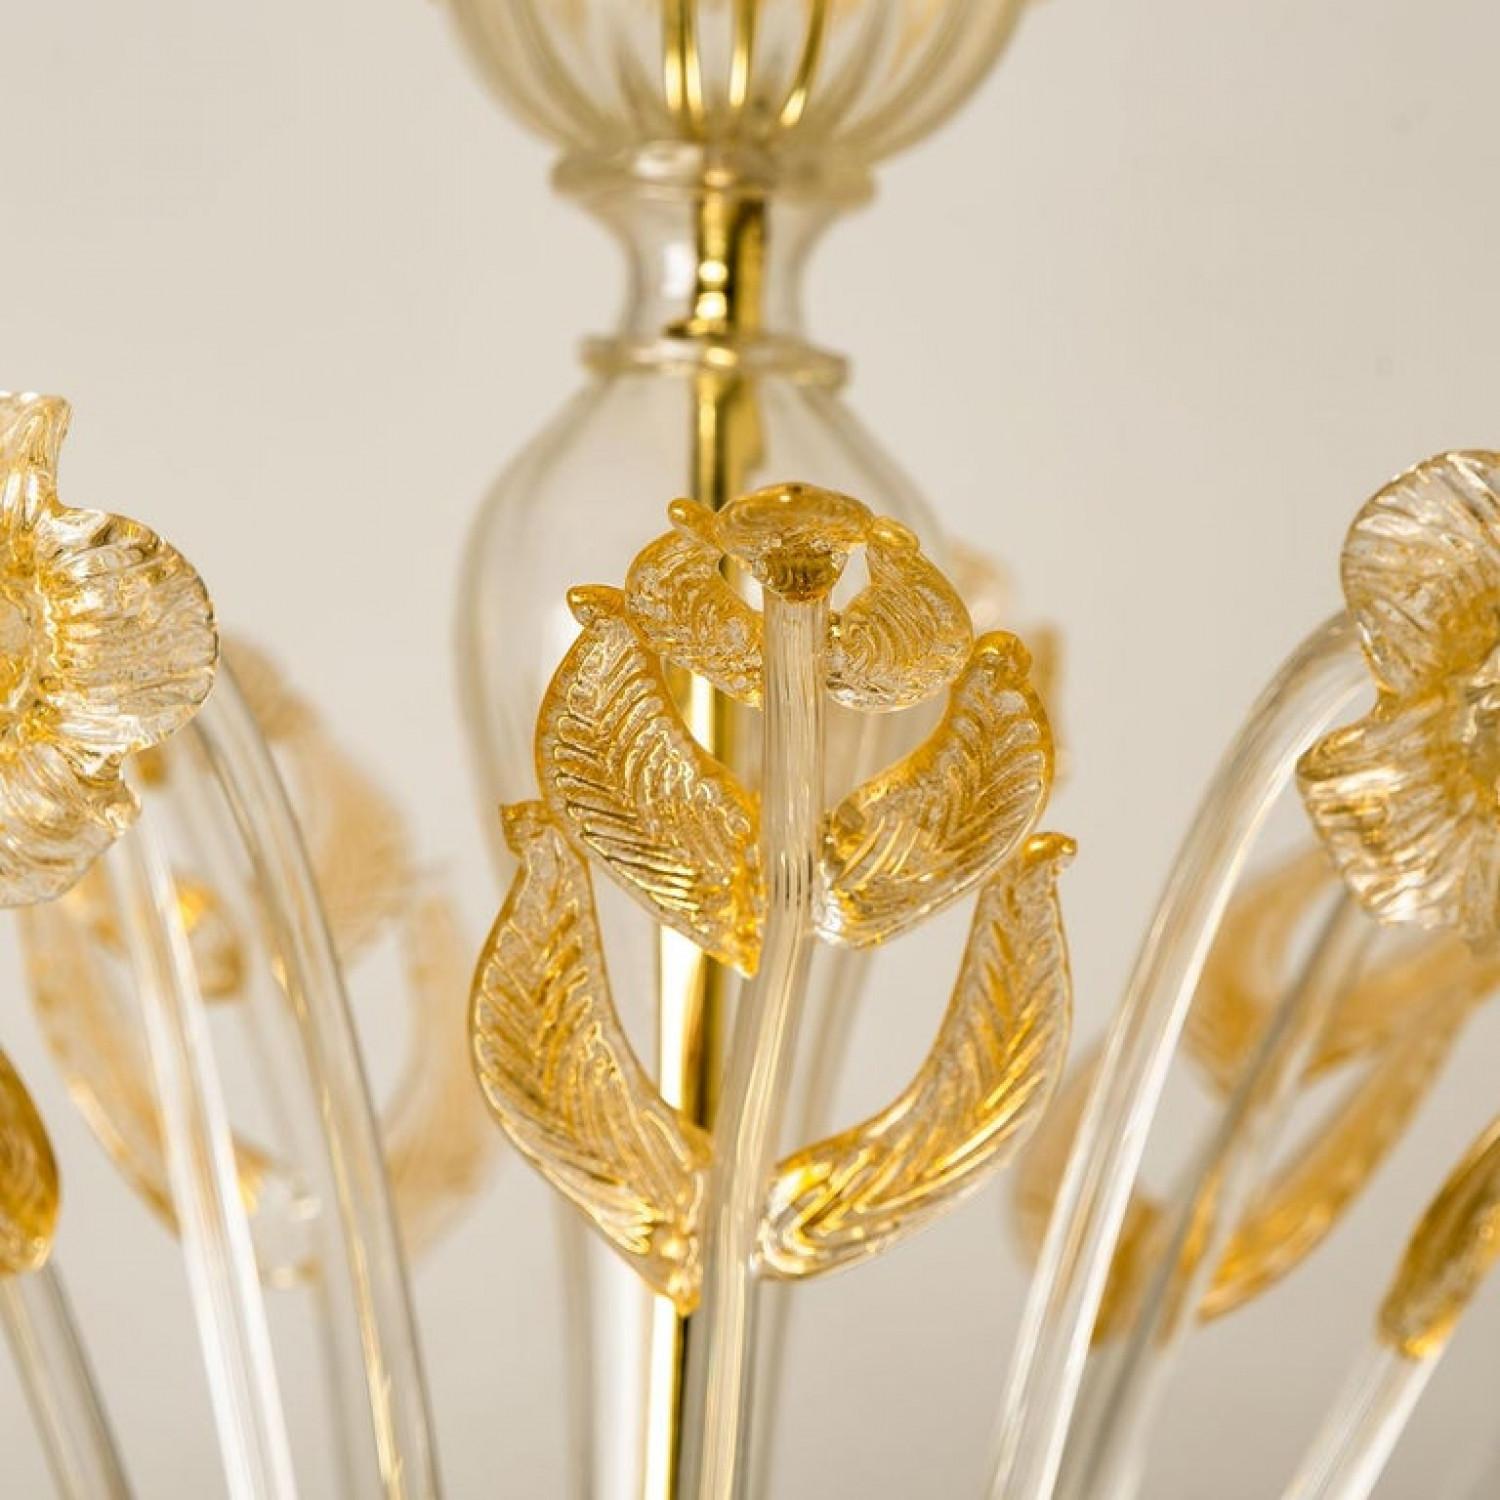 Large Venetian Chandelier in Gilded Murano Glass, by Barovier, 1950s For Sale 11